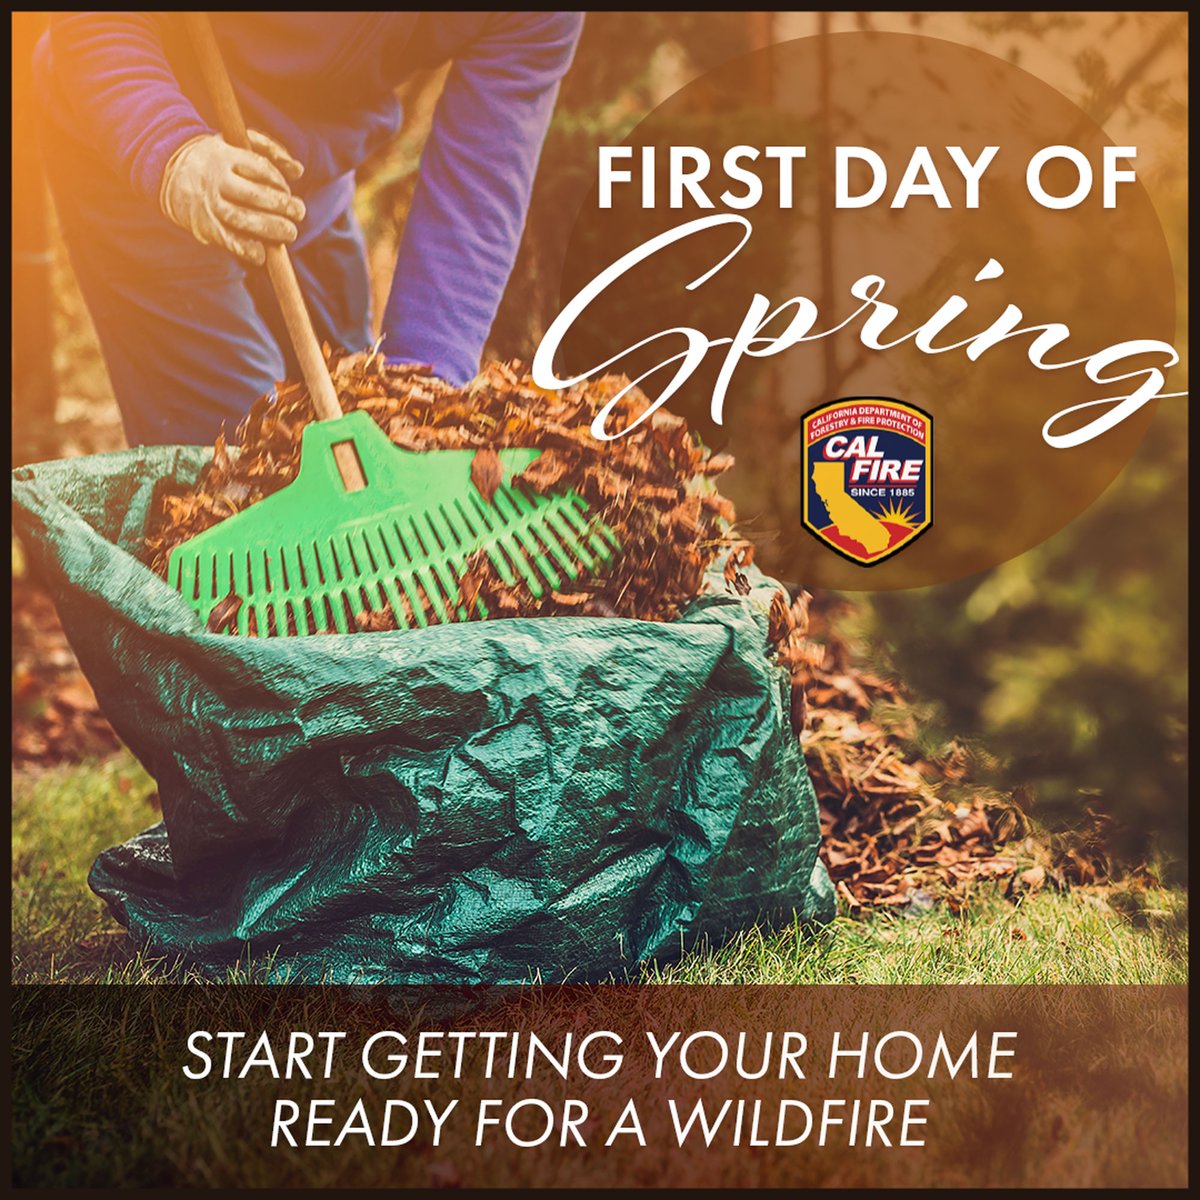 🌷🔥 As the flowers bloom and the birds sing, it's also a reminder that wildfire season is year-round. Today marks the #FirstDayofSpring, and while we welcome the warmer weather, it's crucial to start preparing your home for peak wildfire season. Here are some tips to help…